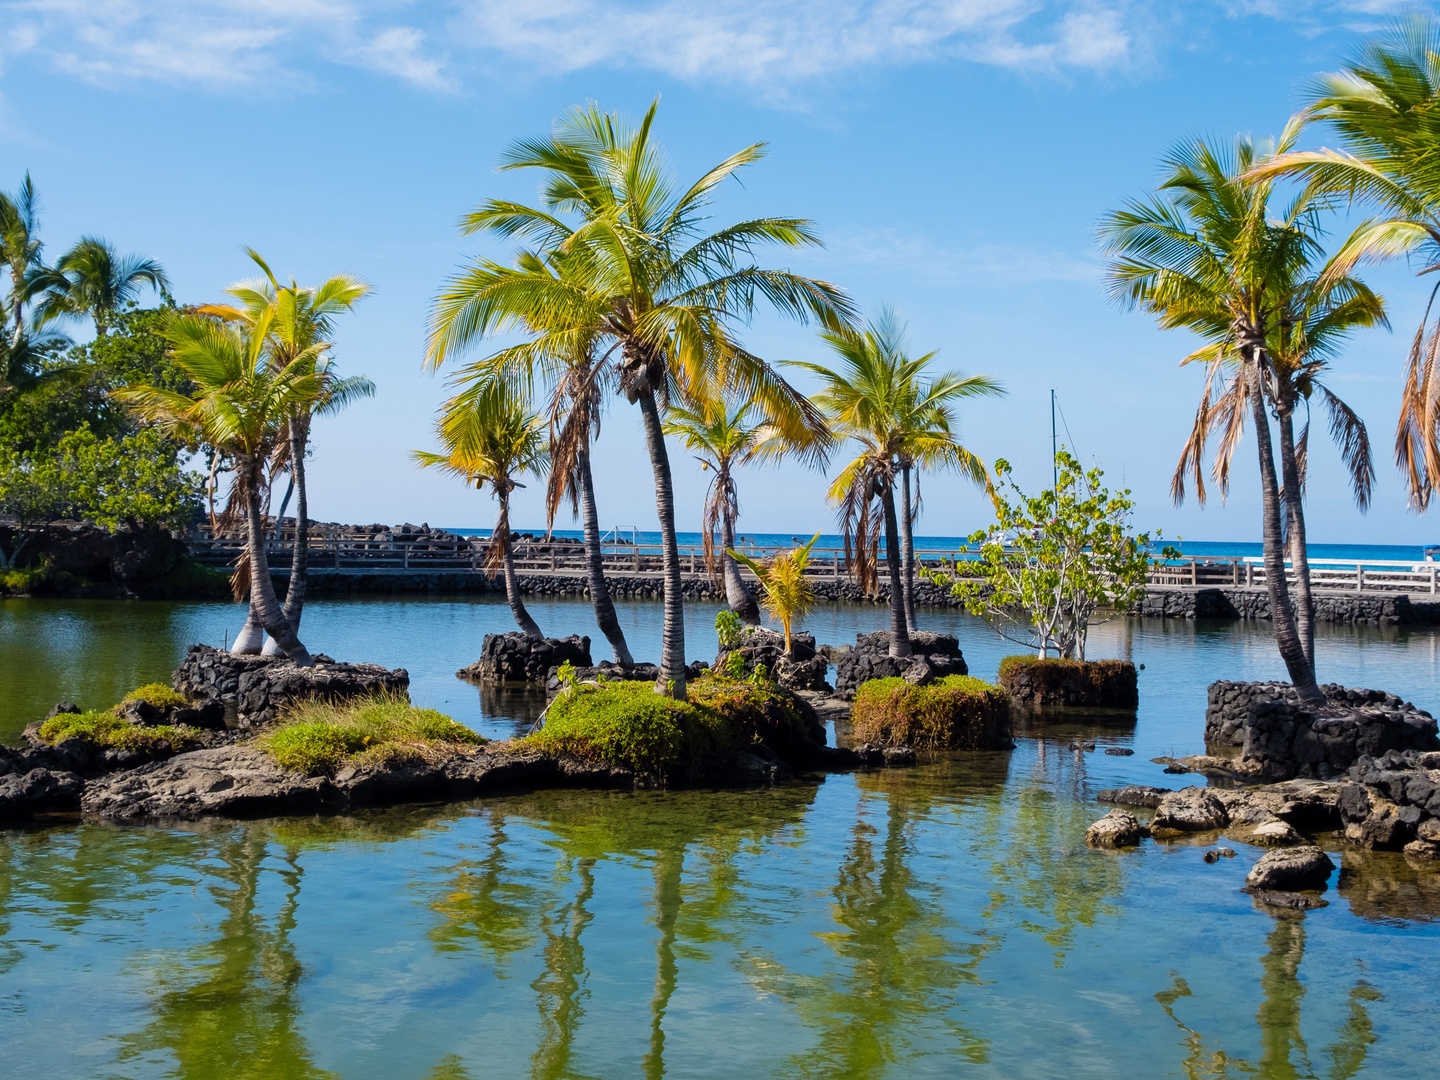 Kamuela Vacation Rentals, Kulalani at Mauna Lani 804 - Relax and let the rhythm of the swaying trees by the water transport you to a tranquil state of mind